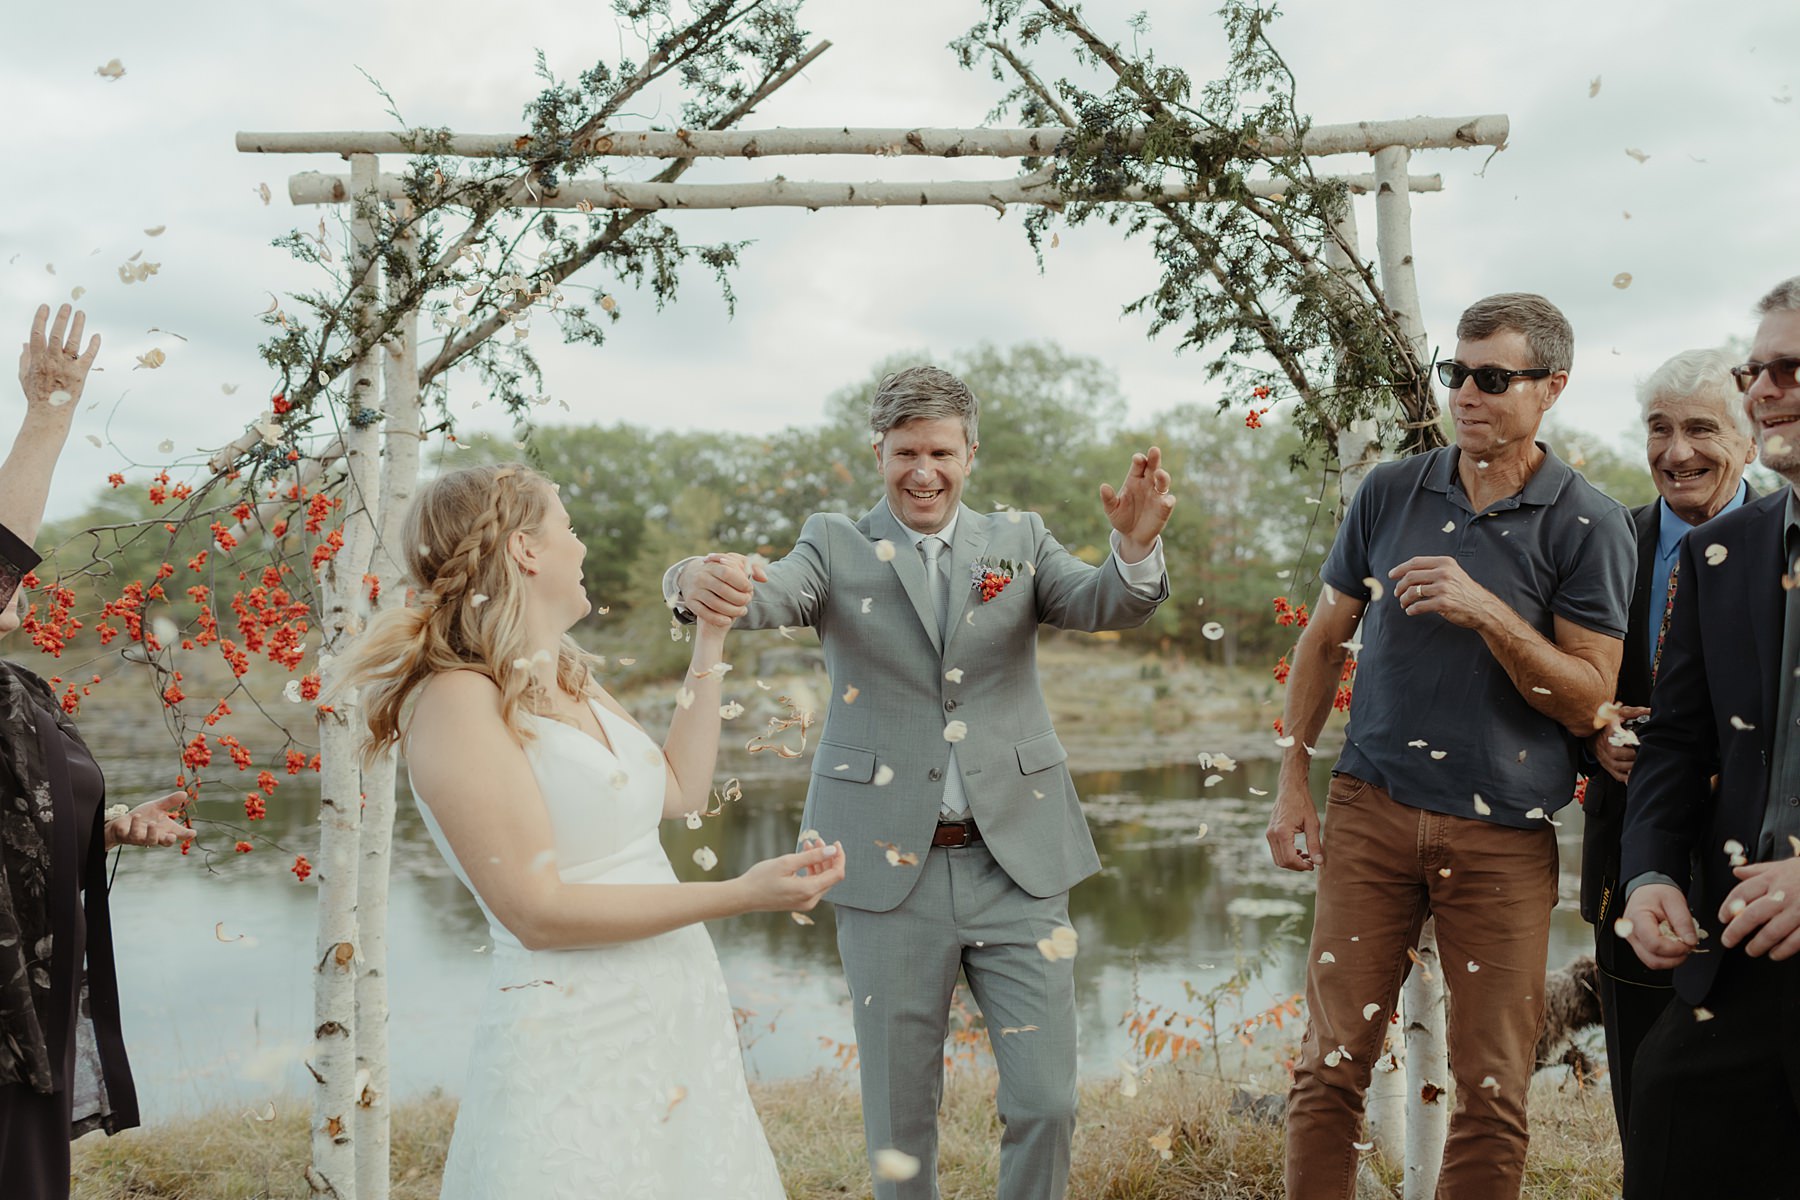 eco-friendly wedding ideas for a sustainable wedding including confetti made from wood shavings from handbuild DIY wedding arch